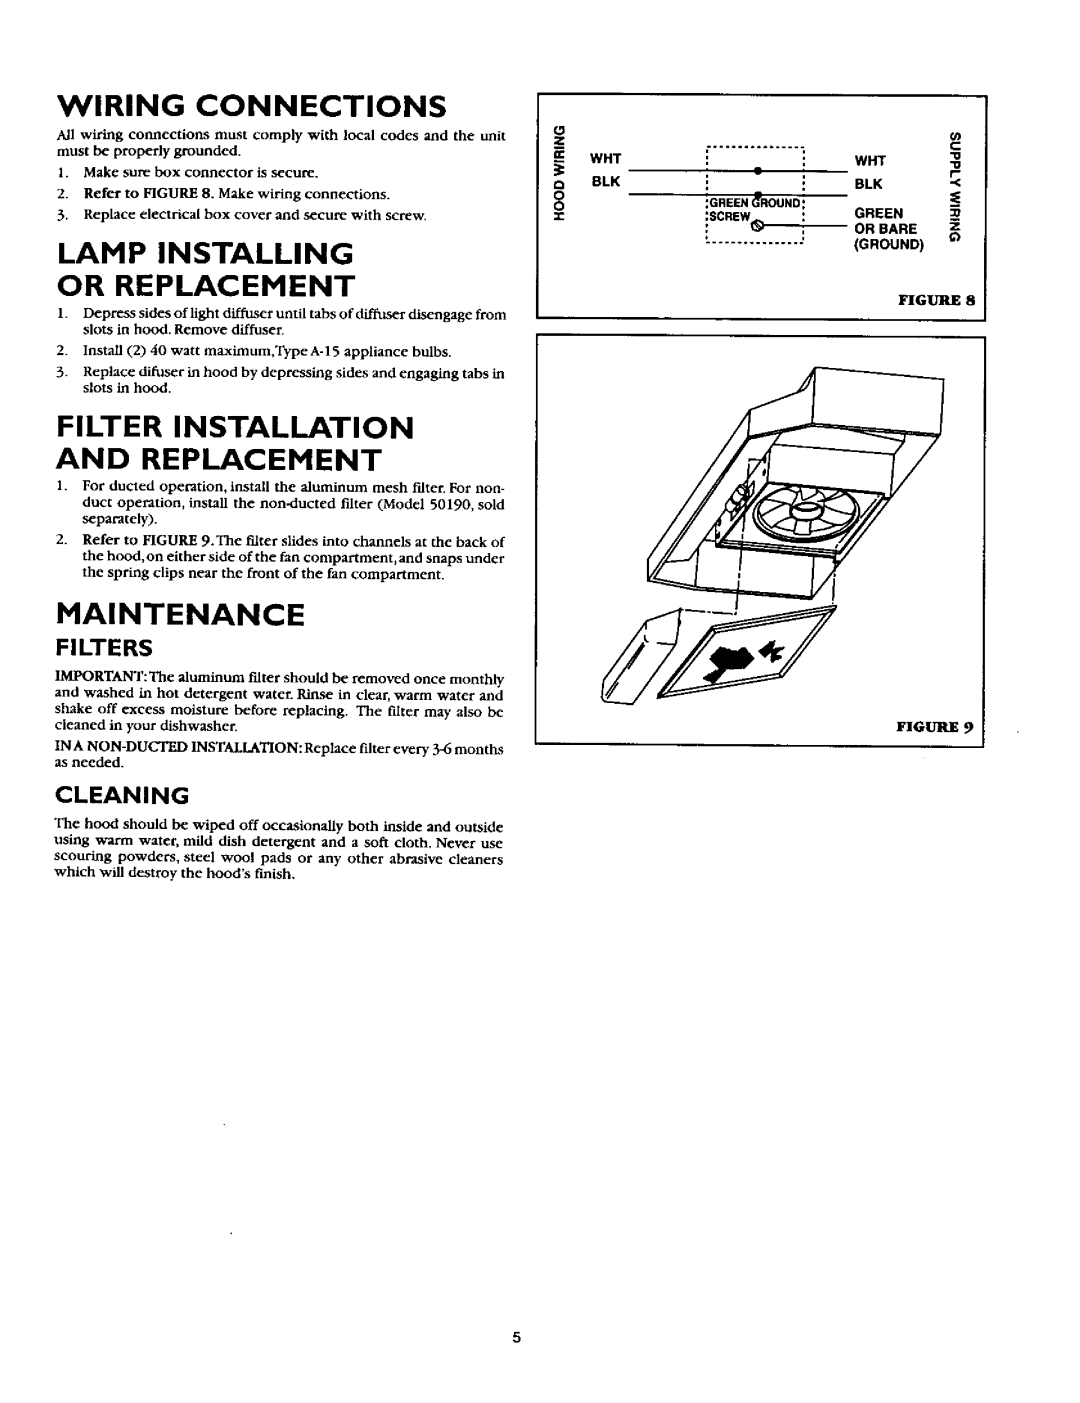 Sears 233.52057 Filter Installation And Replacement, Maintenance, Wiring Connections, Lamp Installing Or Replacement 